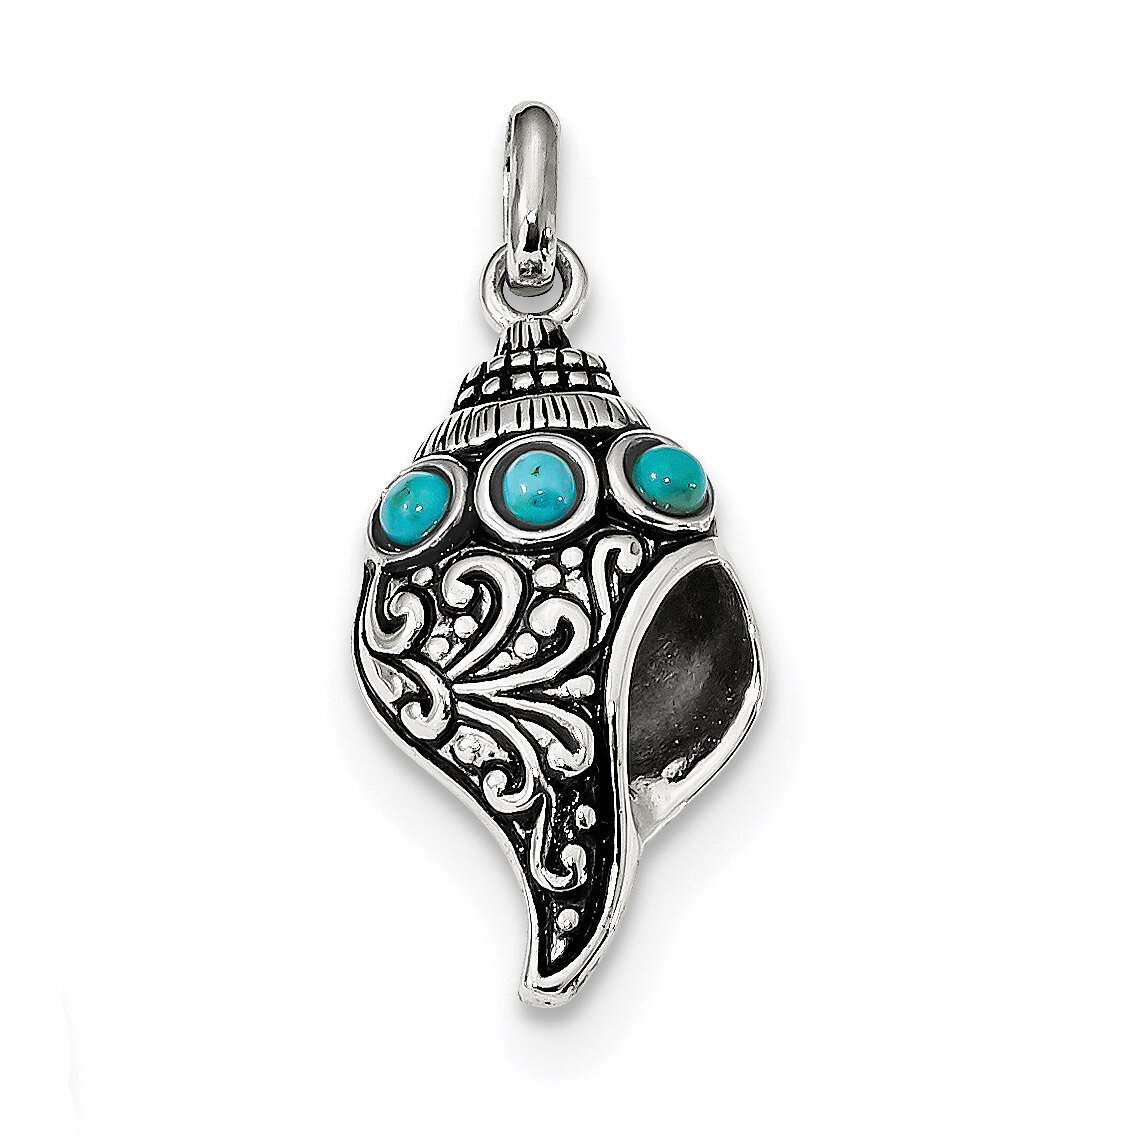 Antiqued Reconstituted Turquoise Shell Pendant Sterling Silver Rhodium QC9264